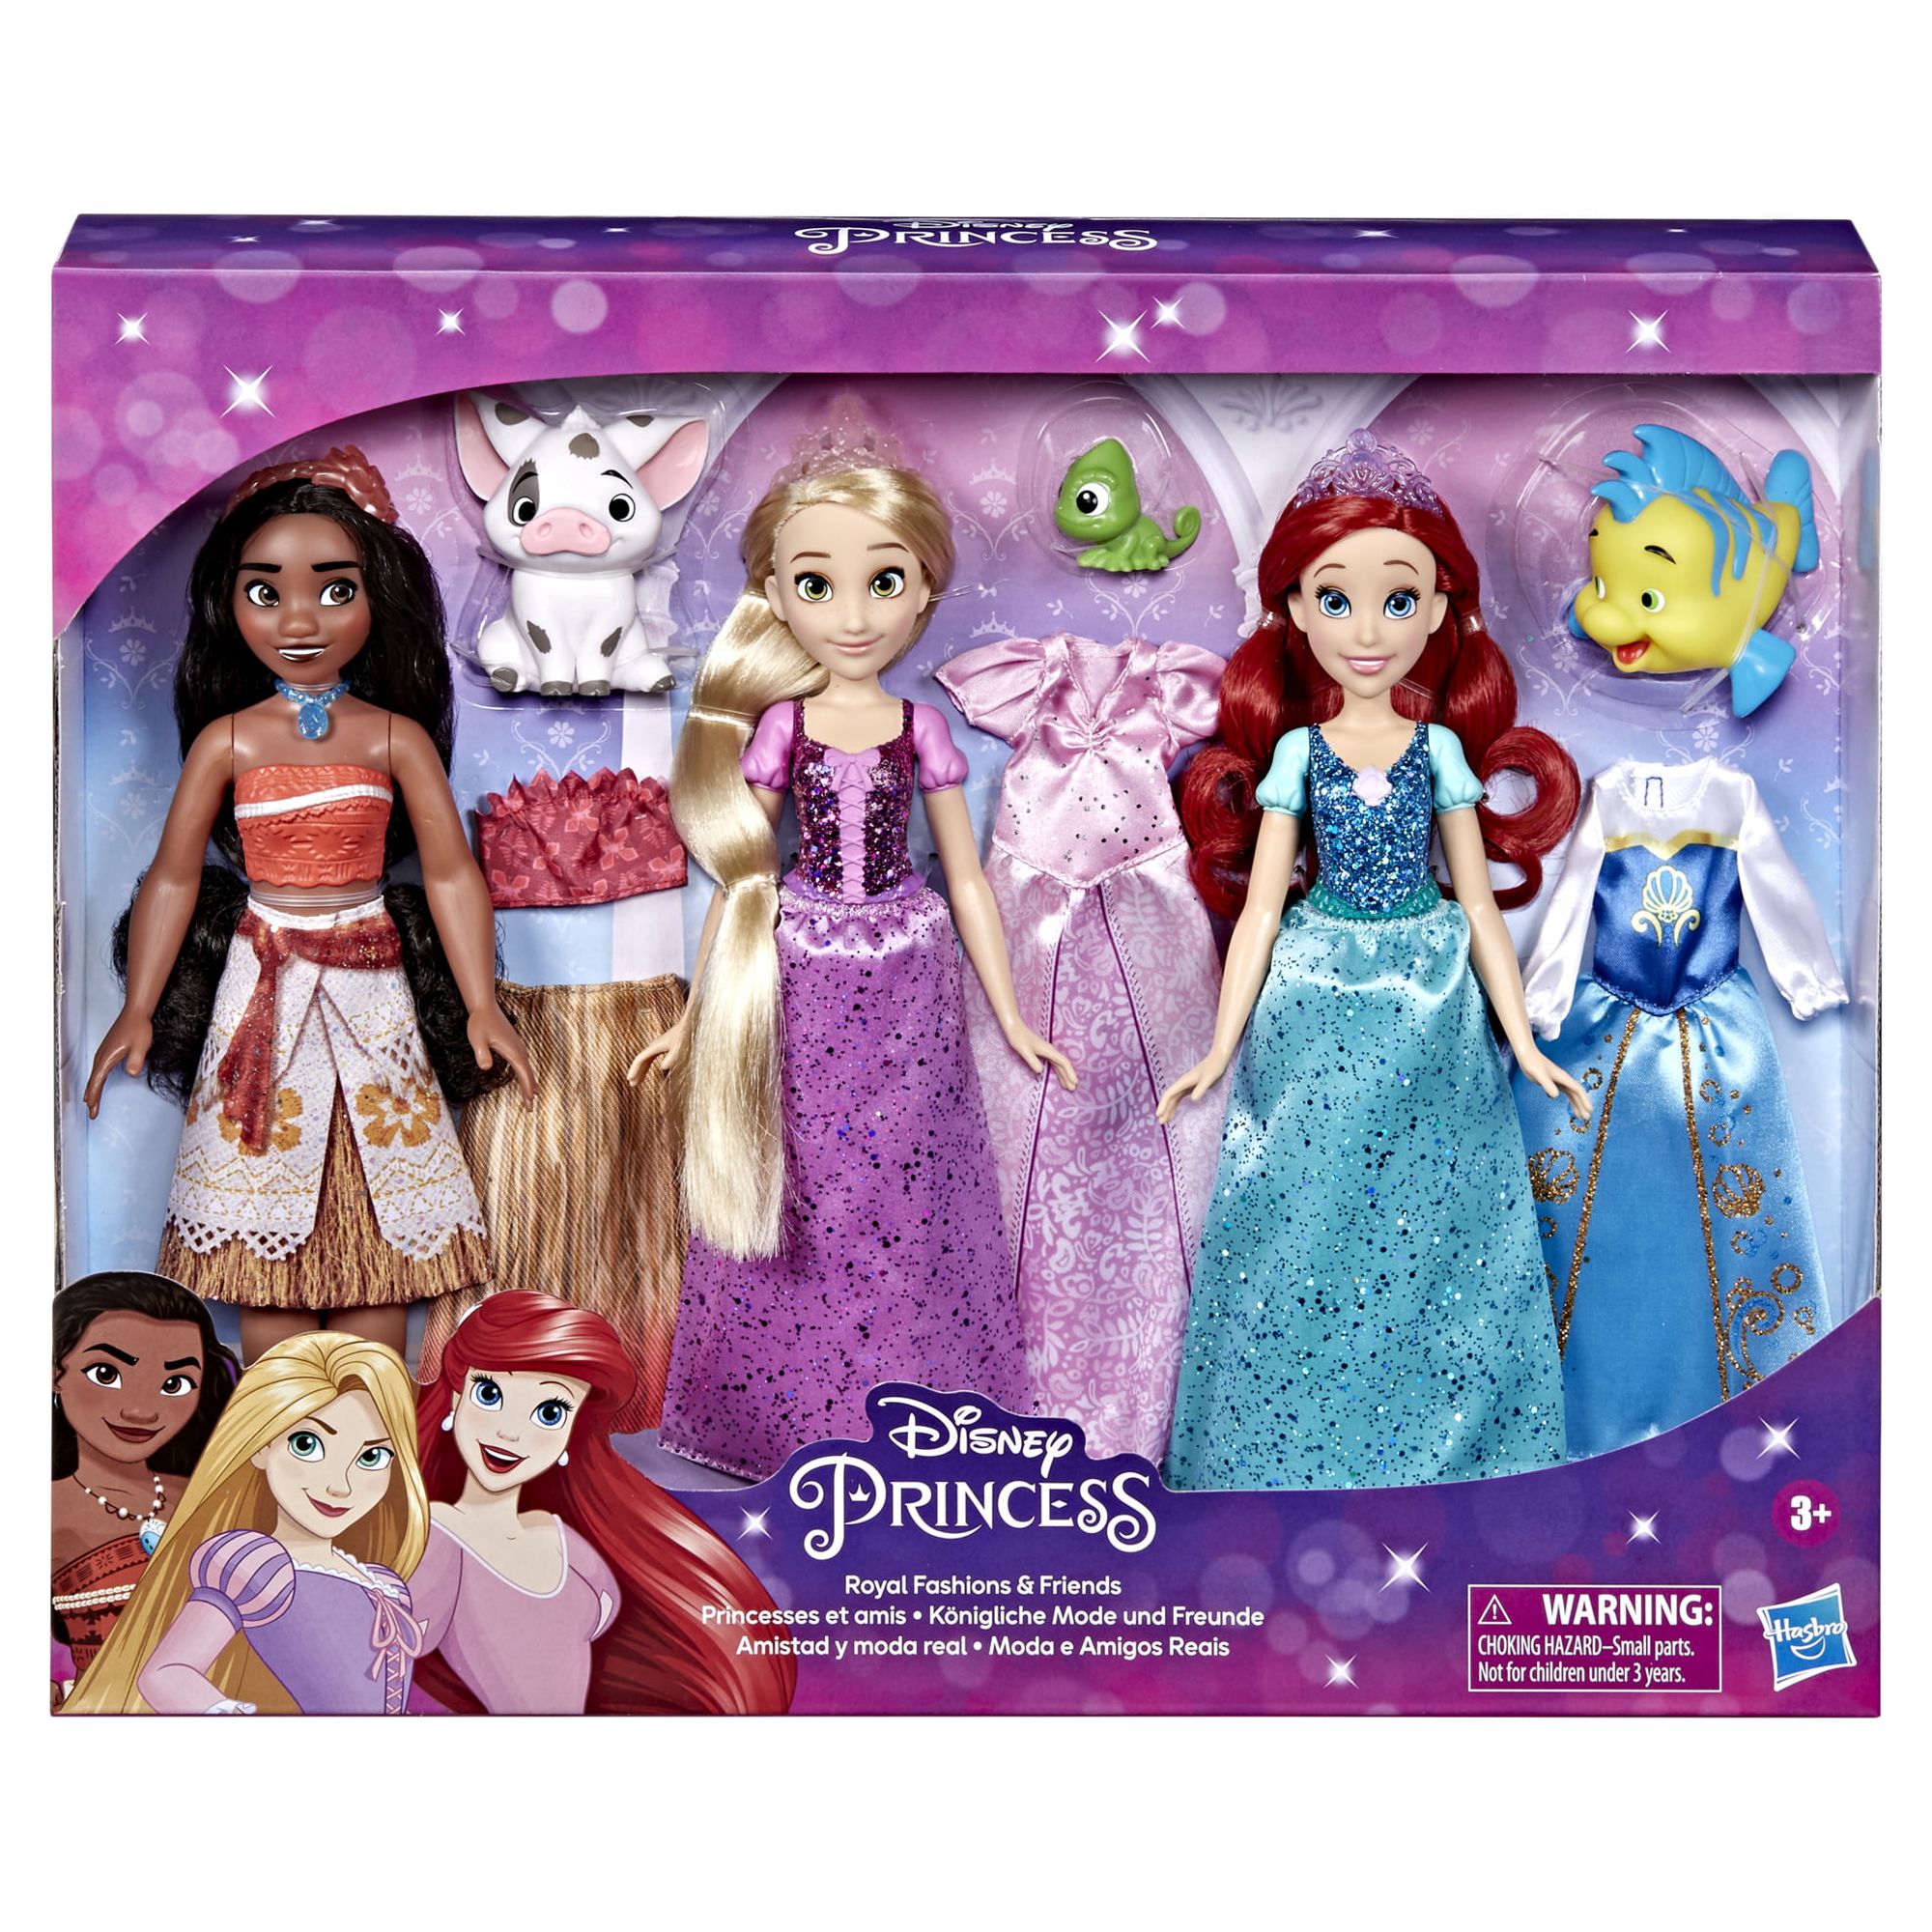 Disney Princess Royal Fashions and Friends 12 inch Fashion Doll, Ariel, Moana, and Rapunzel, Ages 4+ - image 2 of 5